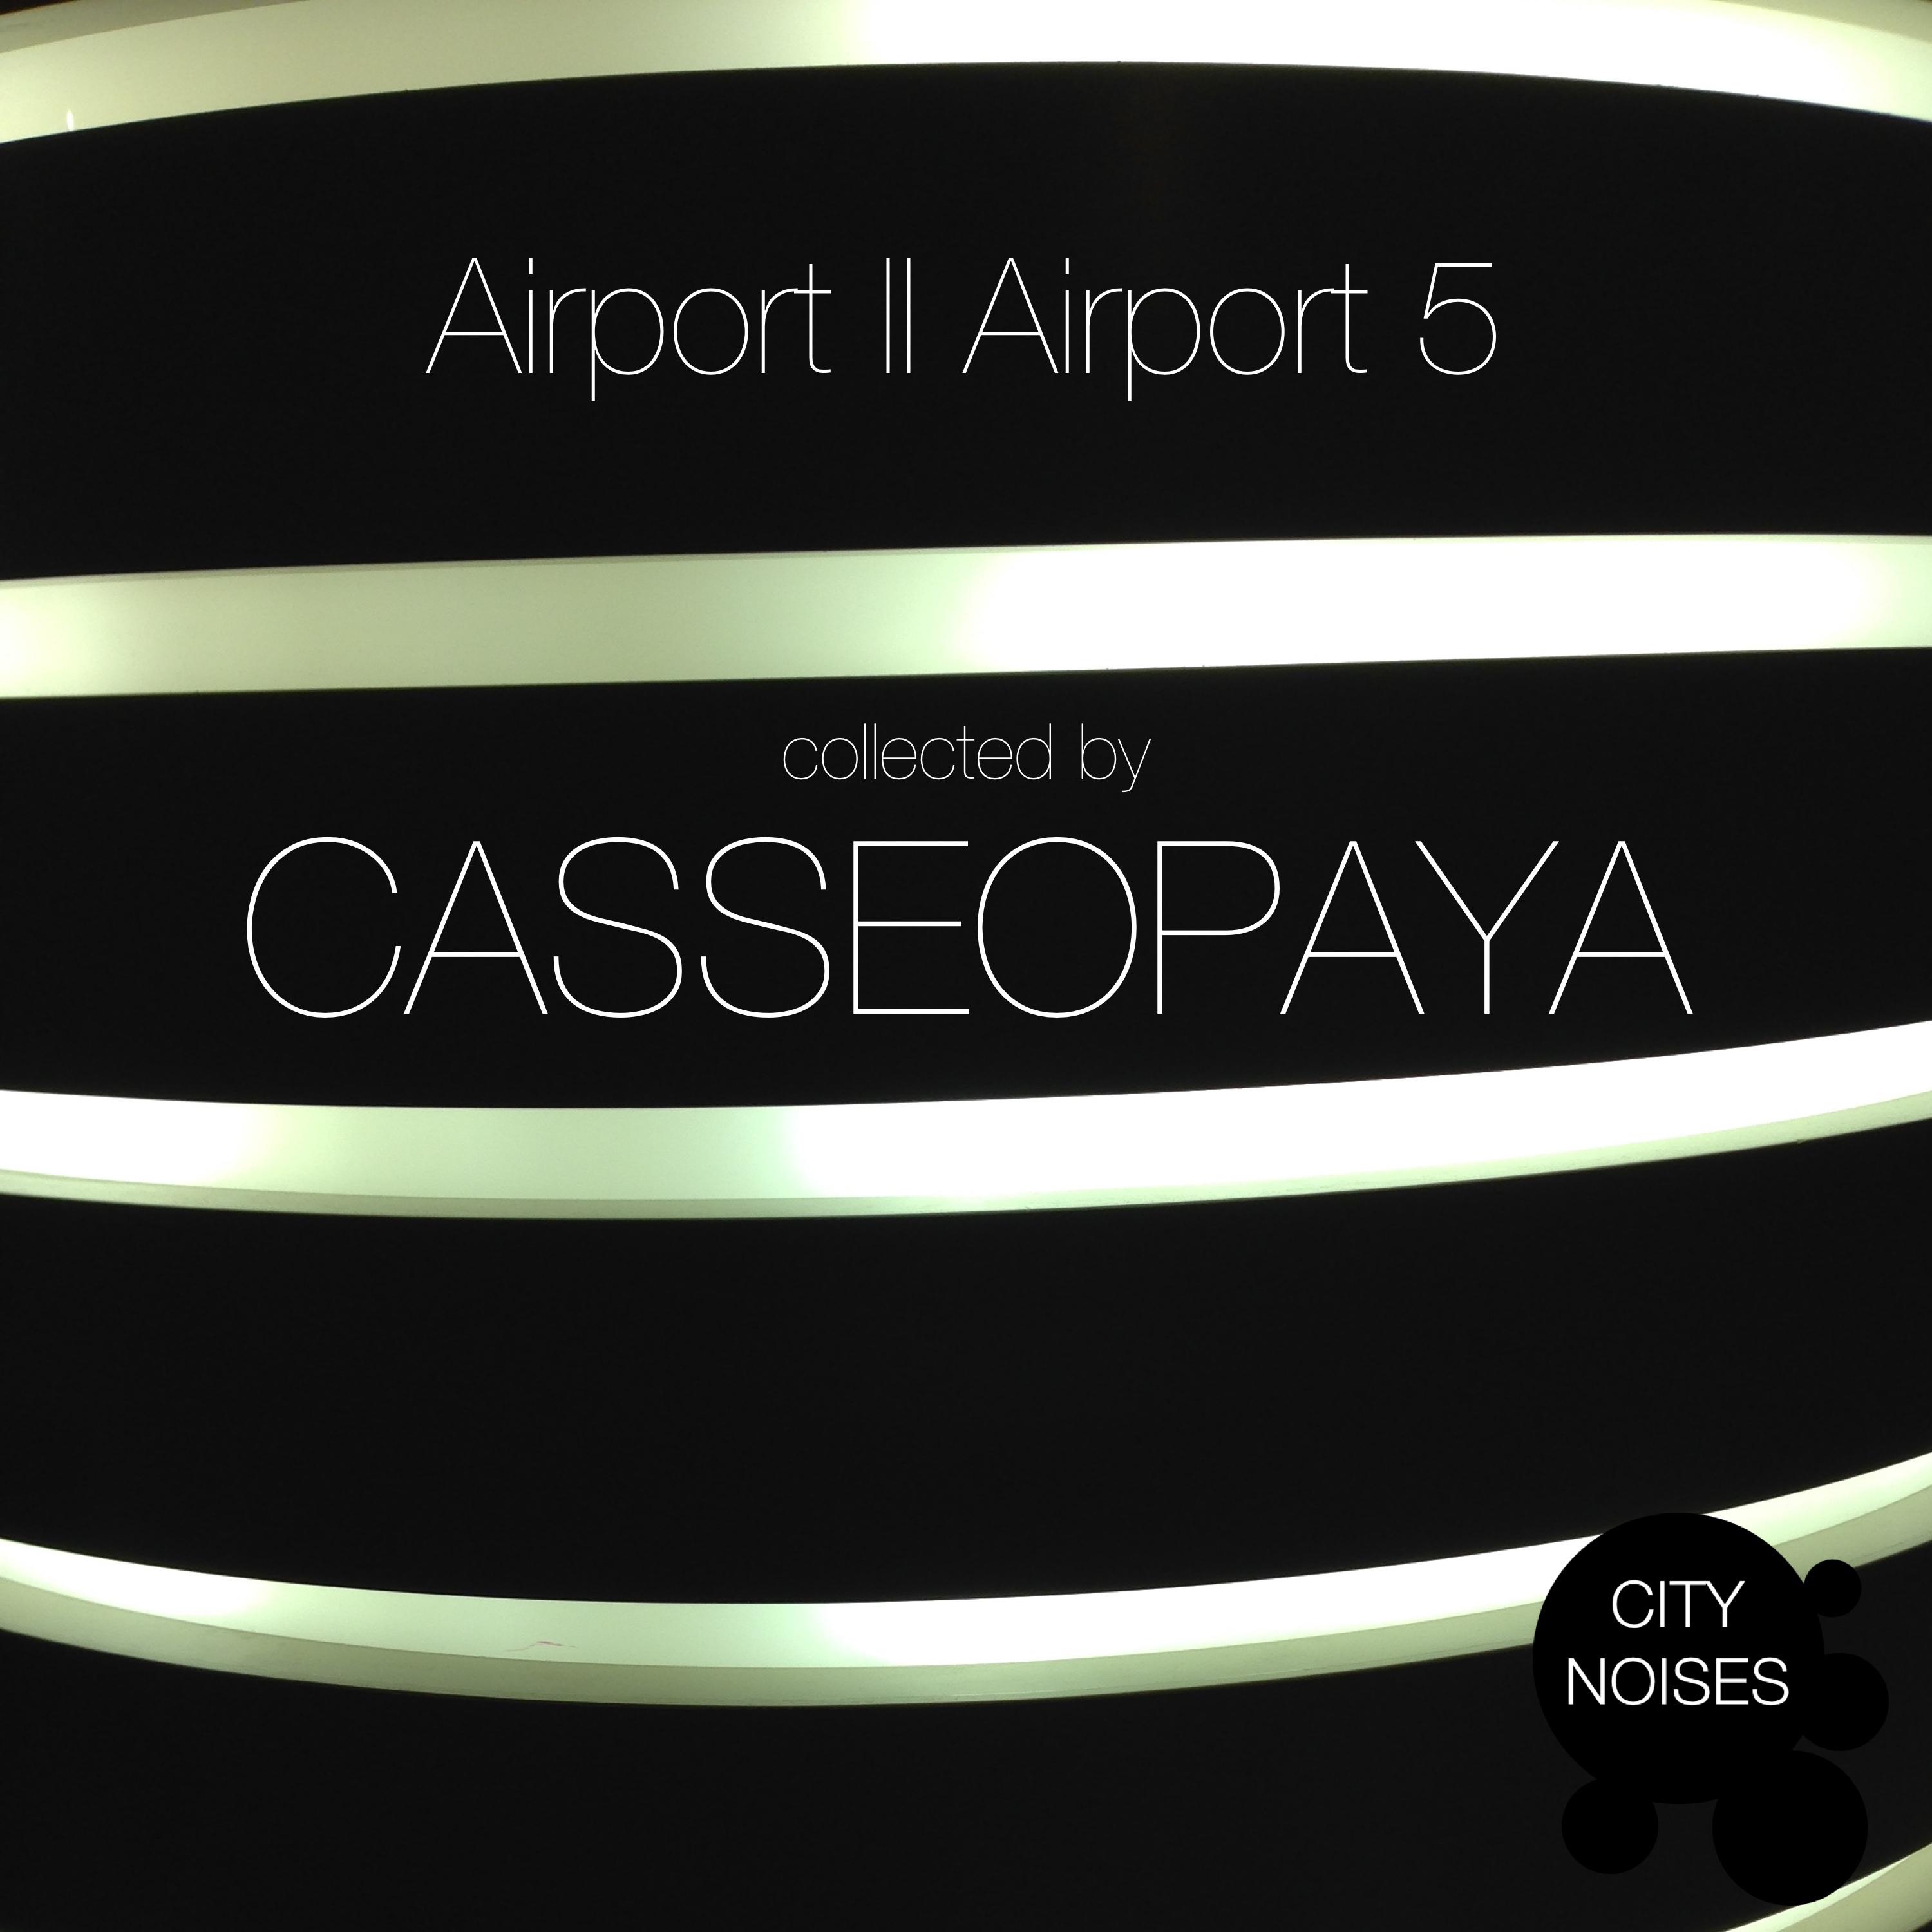 Airport II Airport 5 - A Techno Collection by Casseopaya